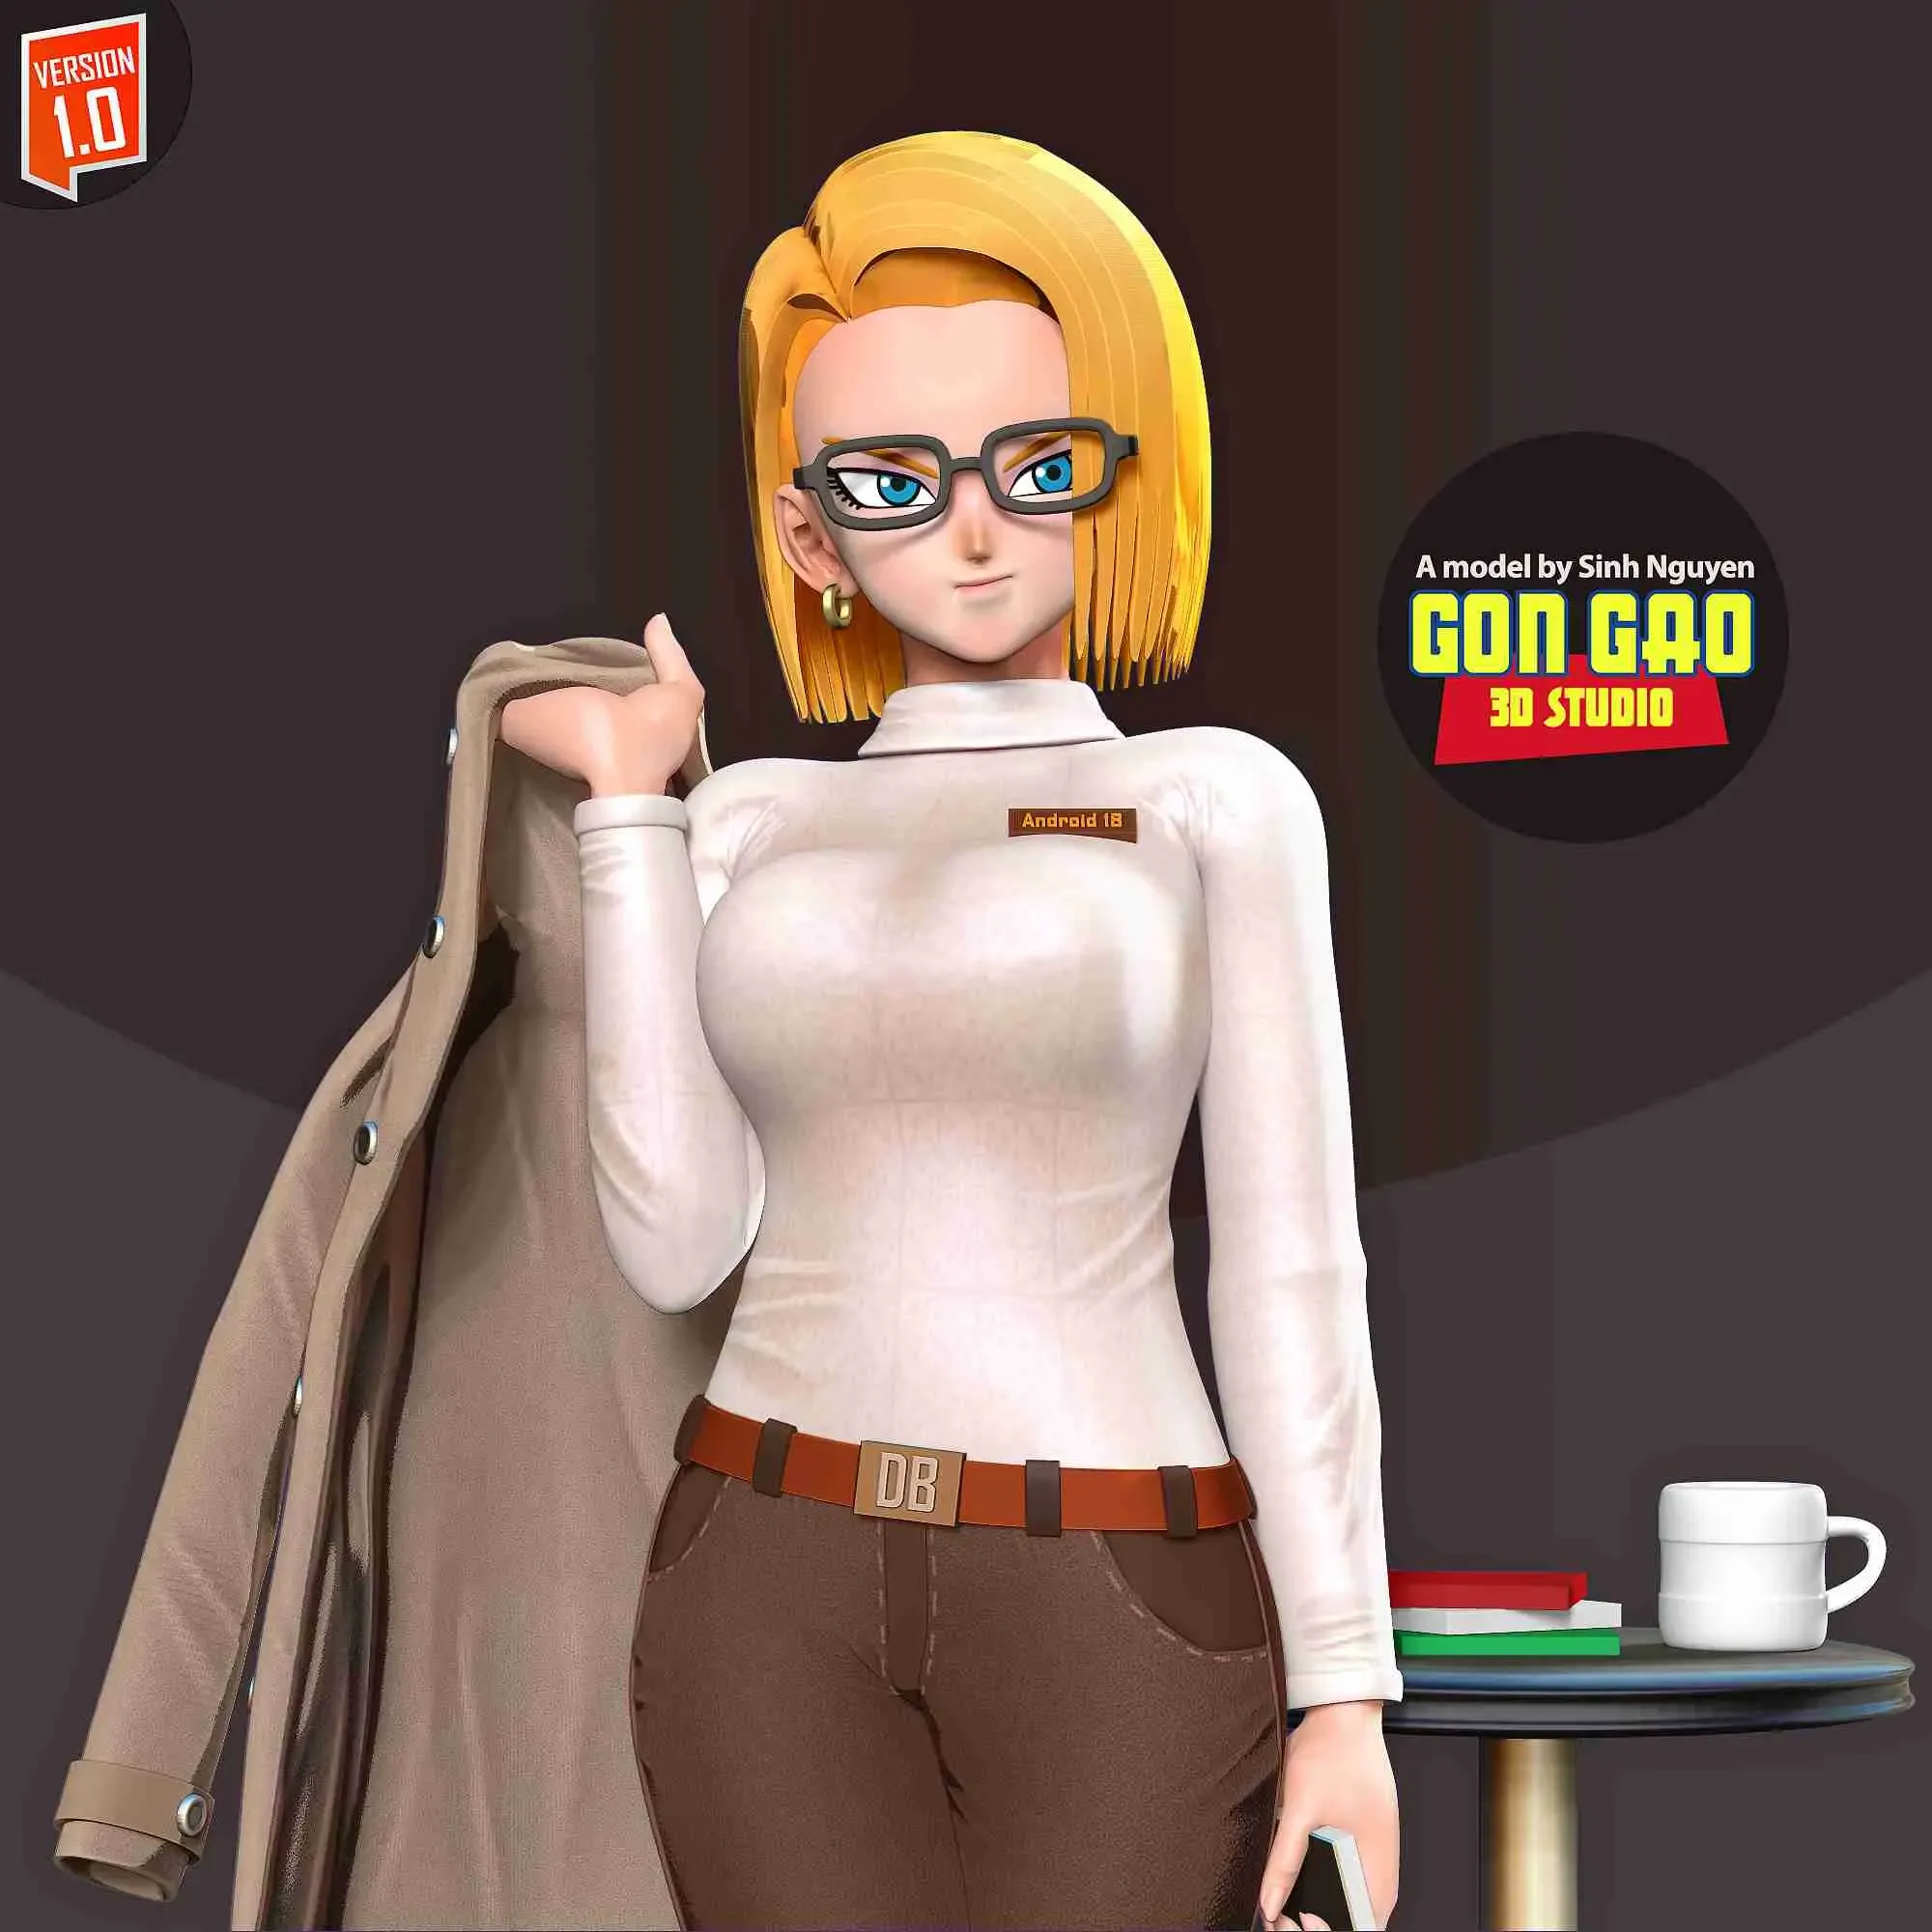 Android 18 - Office Girl